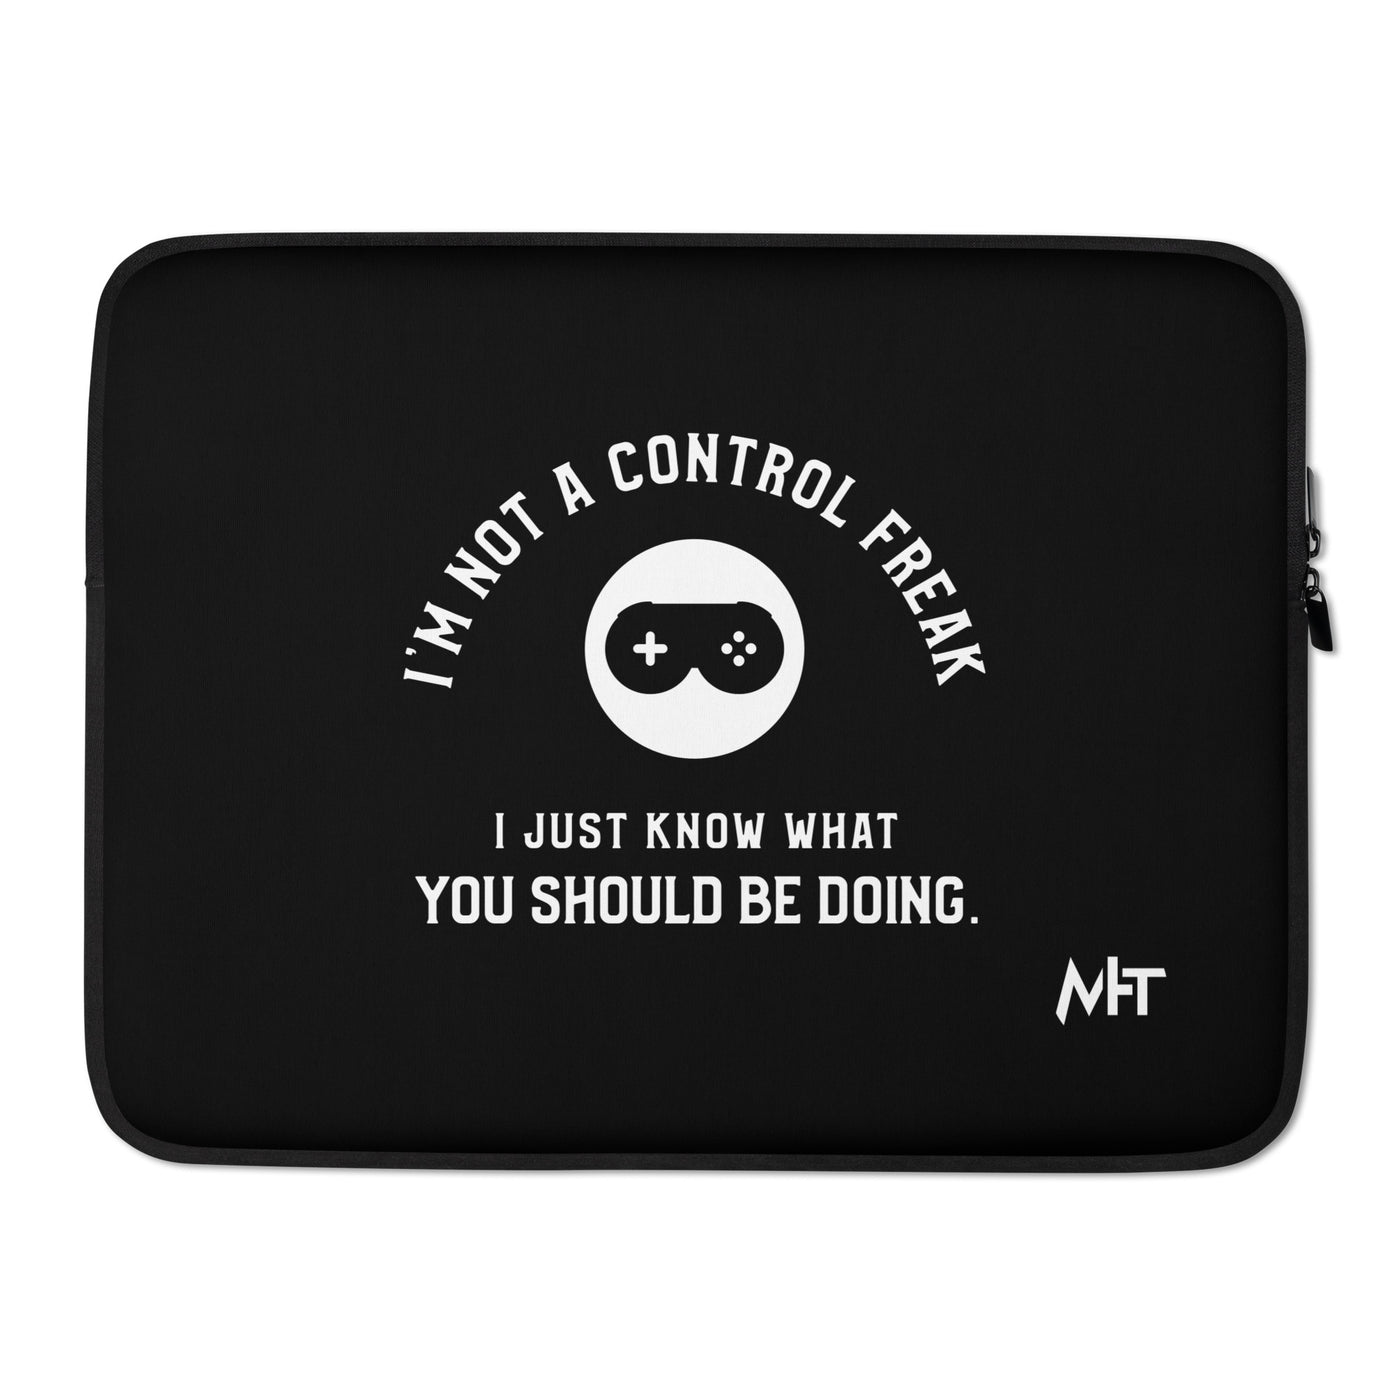 I am not a Control freak, I just Know what you should be doing - Laptop Sleeve